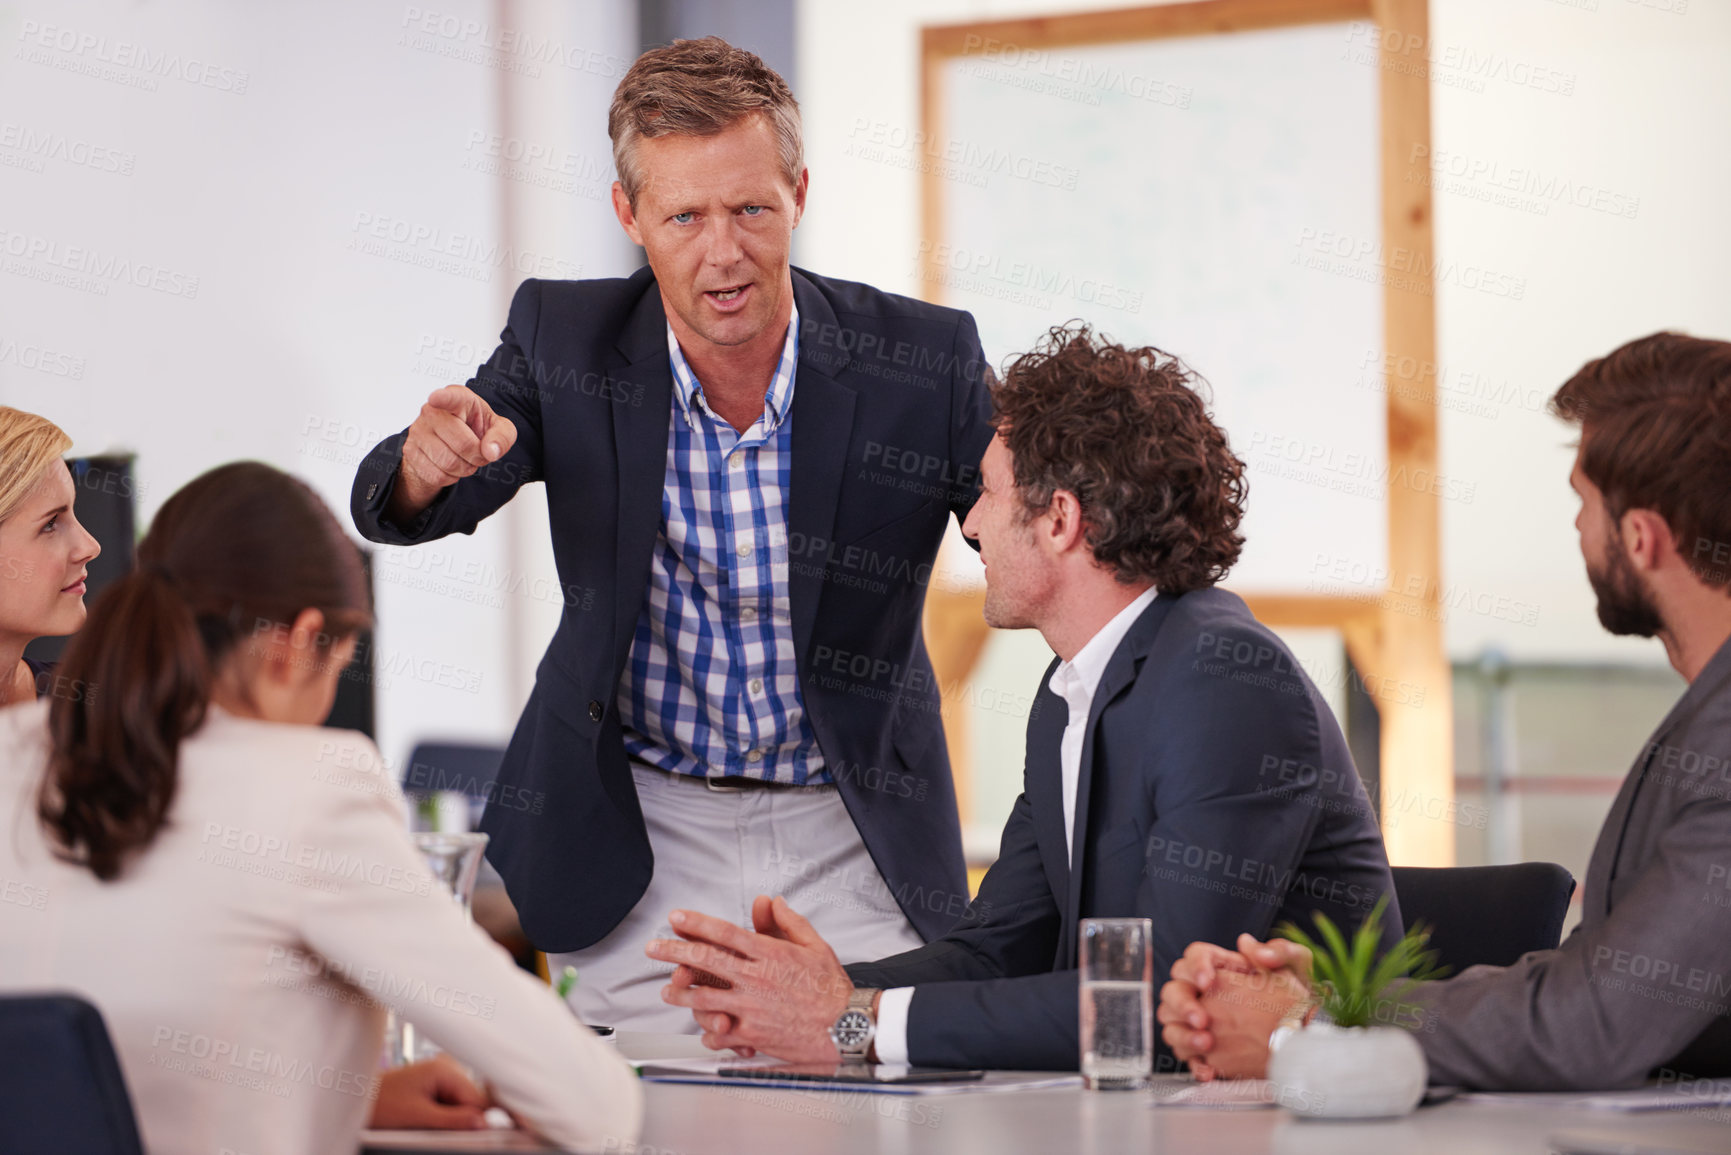 Buy stock photo Cropped shot of a businessman addressing his colleagues during a meeting